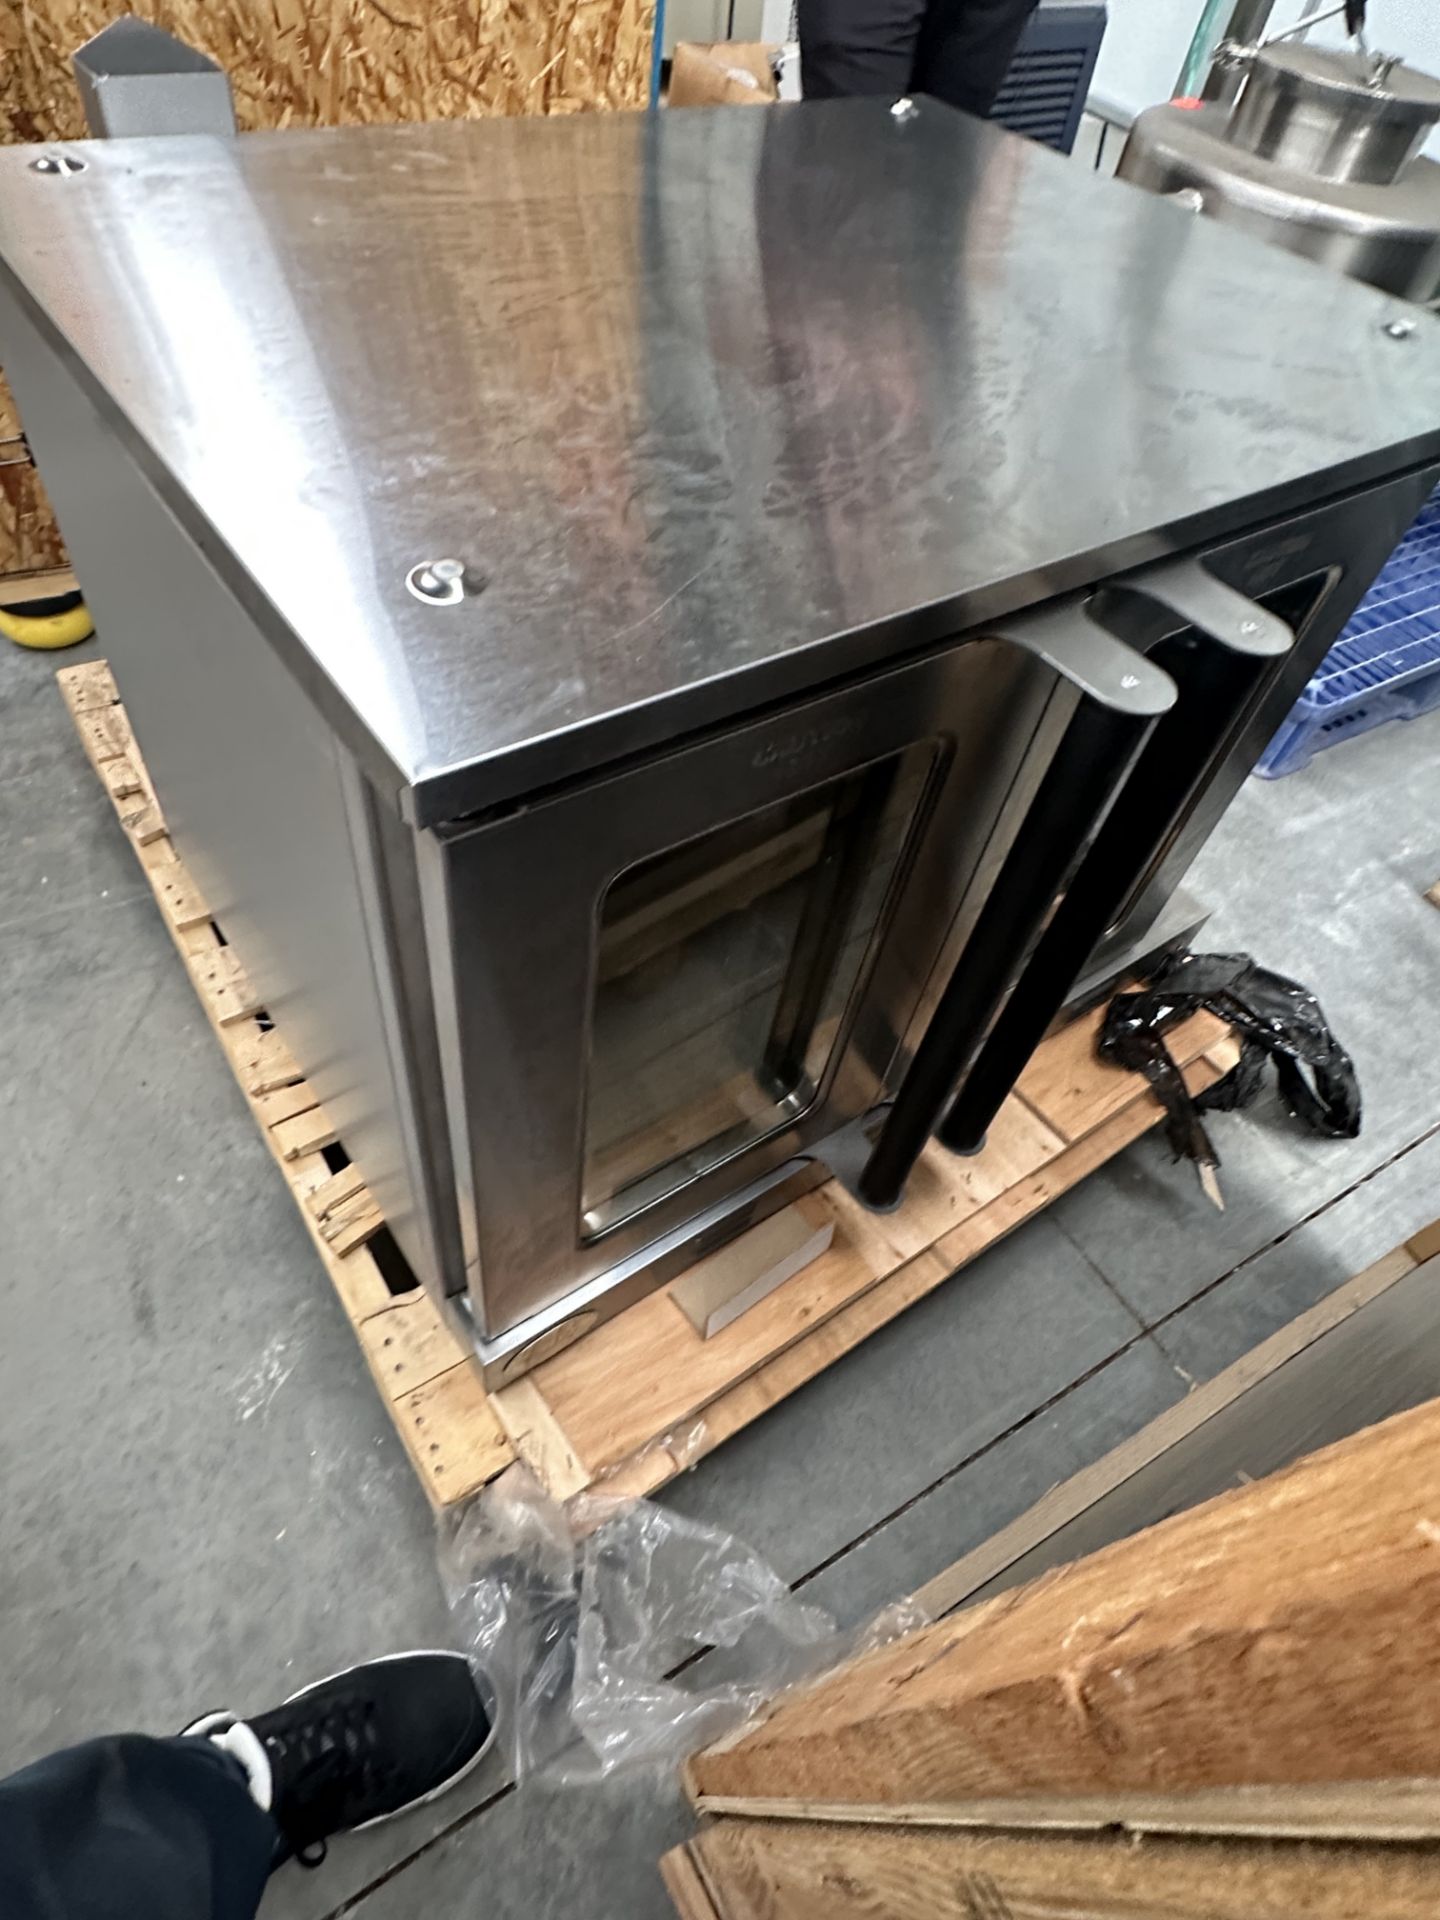 Lot of (2) New Cooking Performance Group Electric Covention Ovens. Model FEC-100 - Image 3 of 6